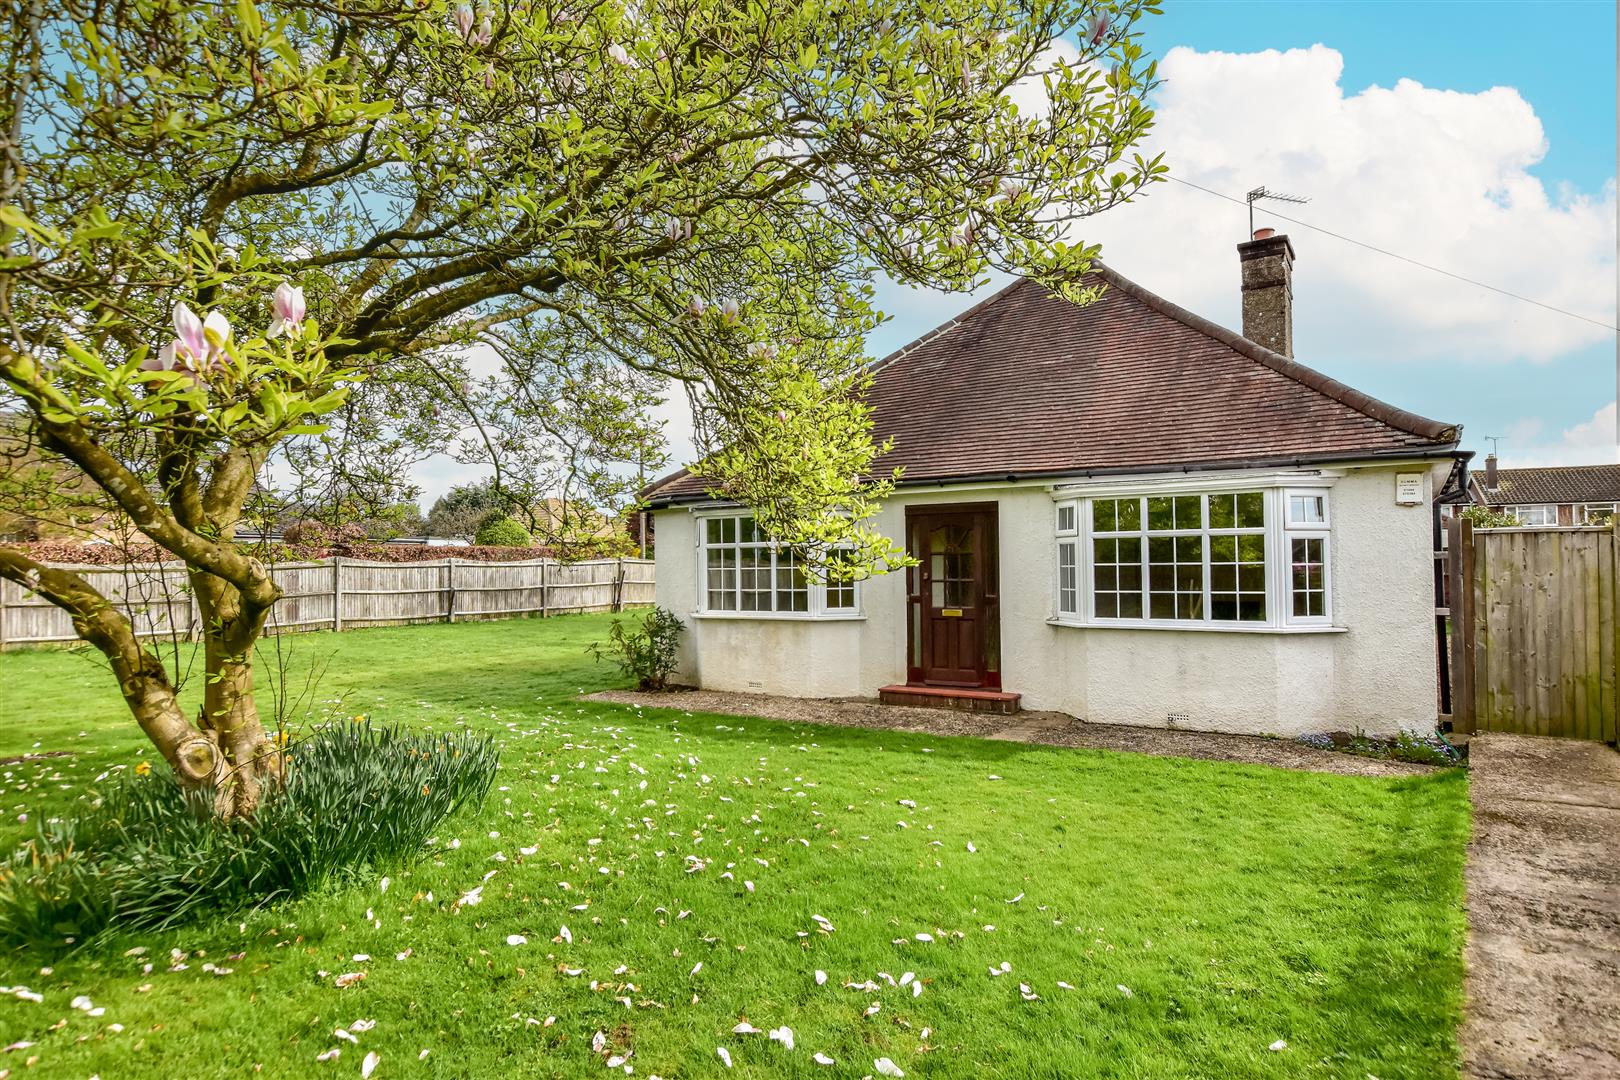 4 bed detached bungalow to rent in Narcot Lane, Chalfont St. Giles, HP8 